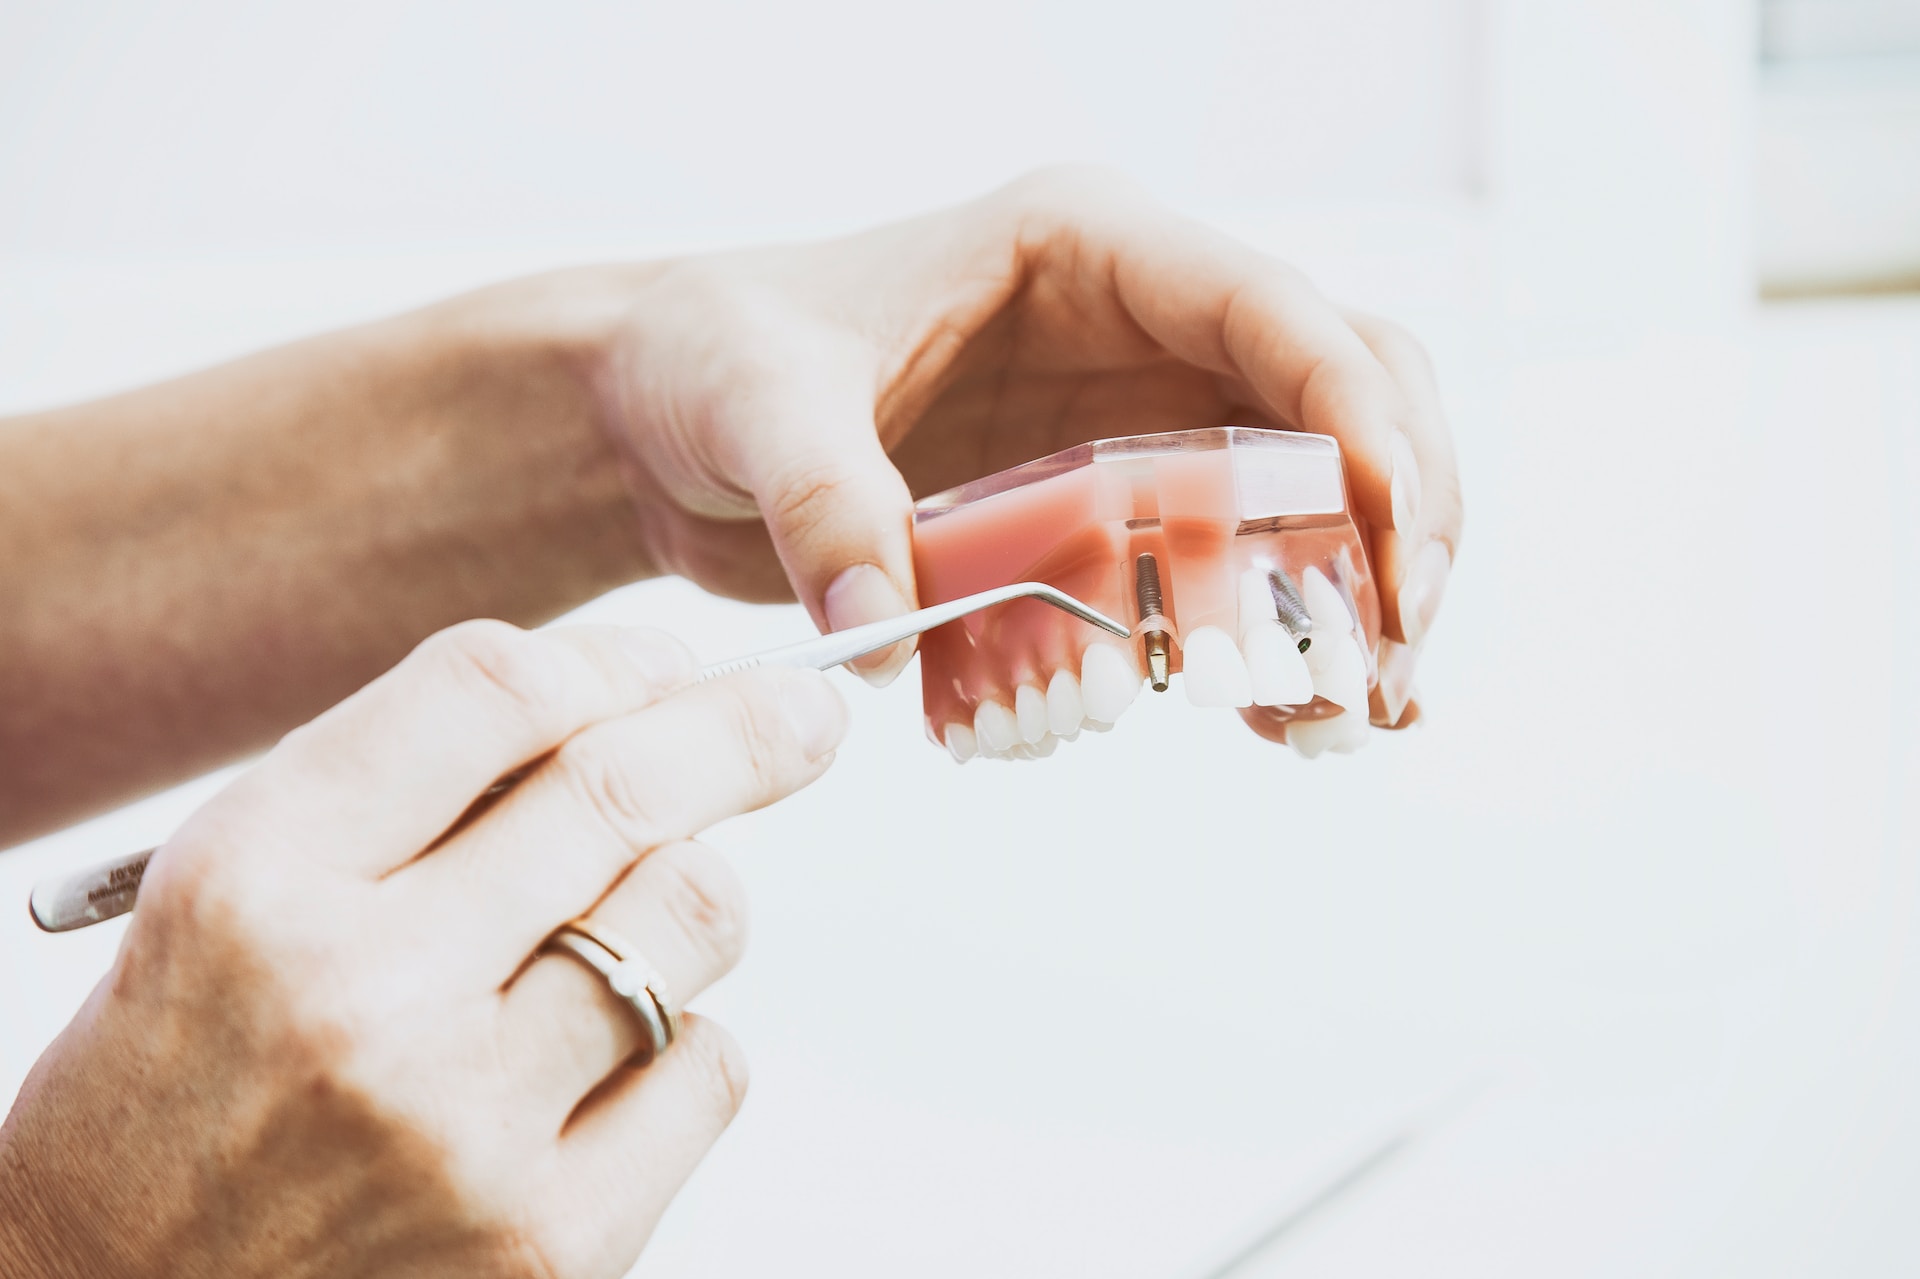 woman's hands holding denture with dental implant